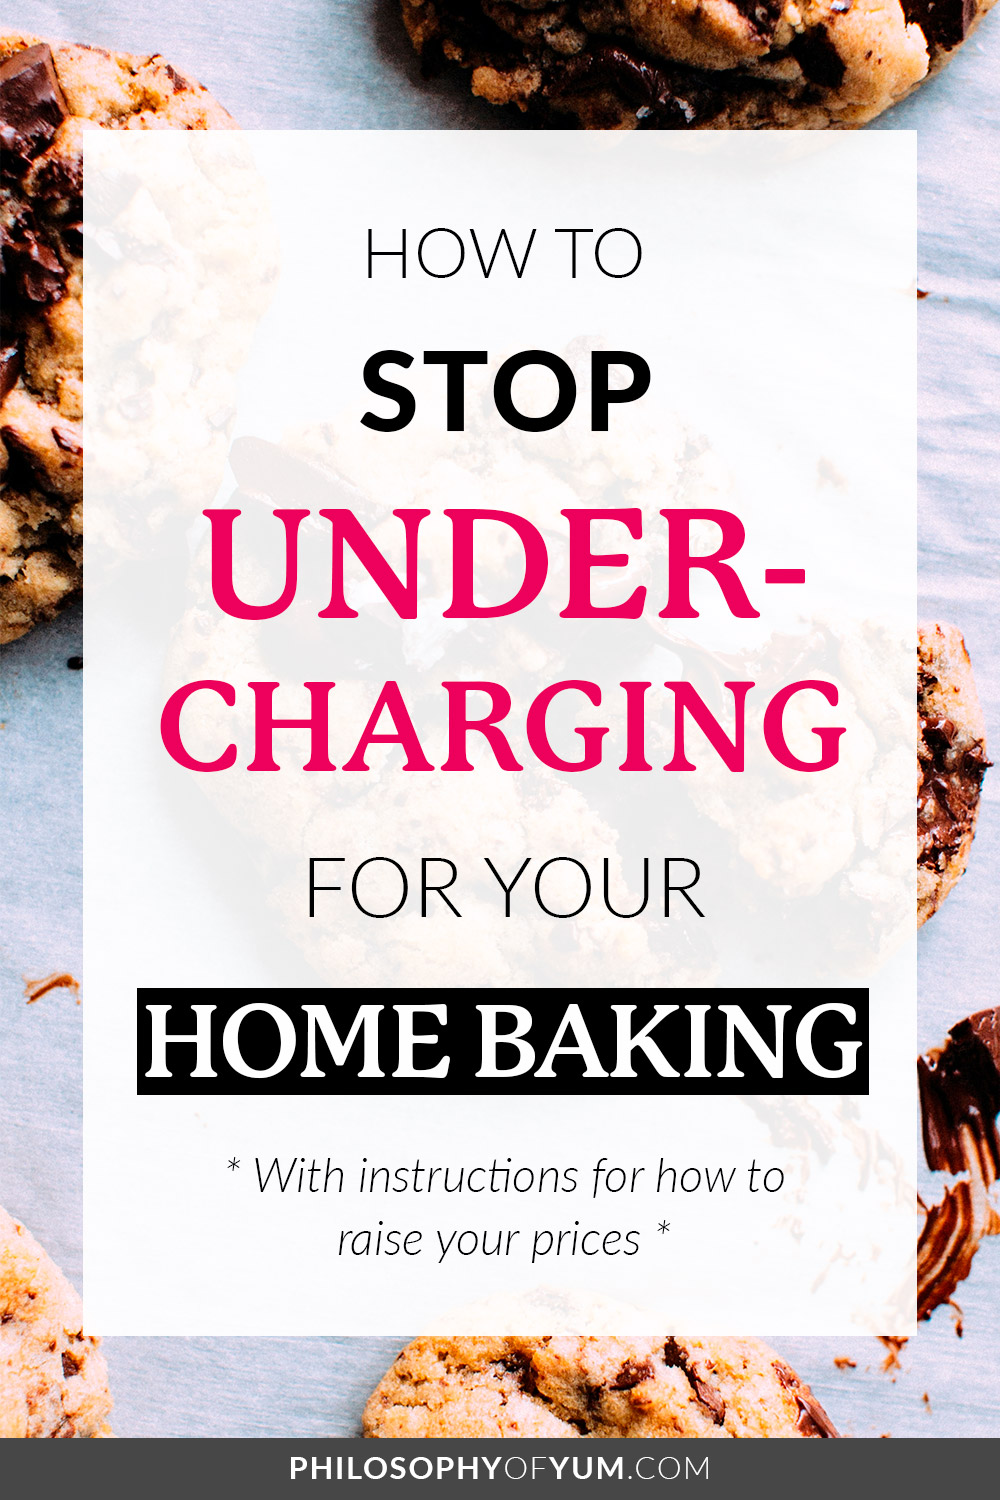 How much income is your home bakery missing out on every month because you keep undercharging for your baking? It shouldn't be this way! You deserve to be paid well for your hard work! In this post you'll learn how to stop feeling guilty for charging customers full price. Then you'll get step-by-step tips for raising your prices so you can start earning more income from your home baking :) #homebakery #homebakerypricing #cakebusiness #homebakingbusiness